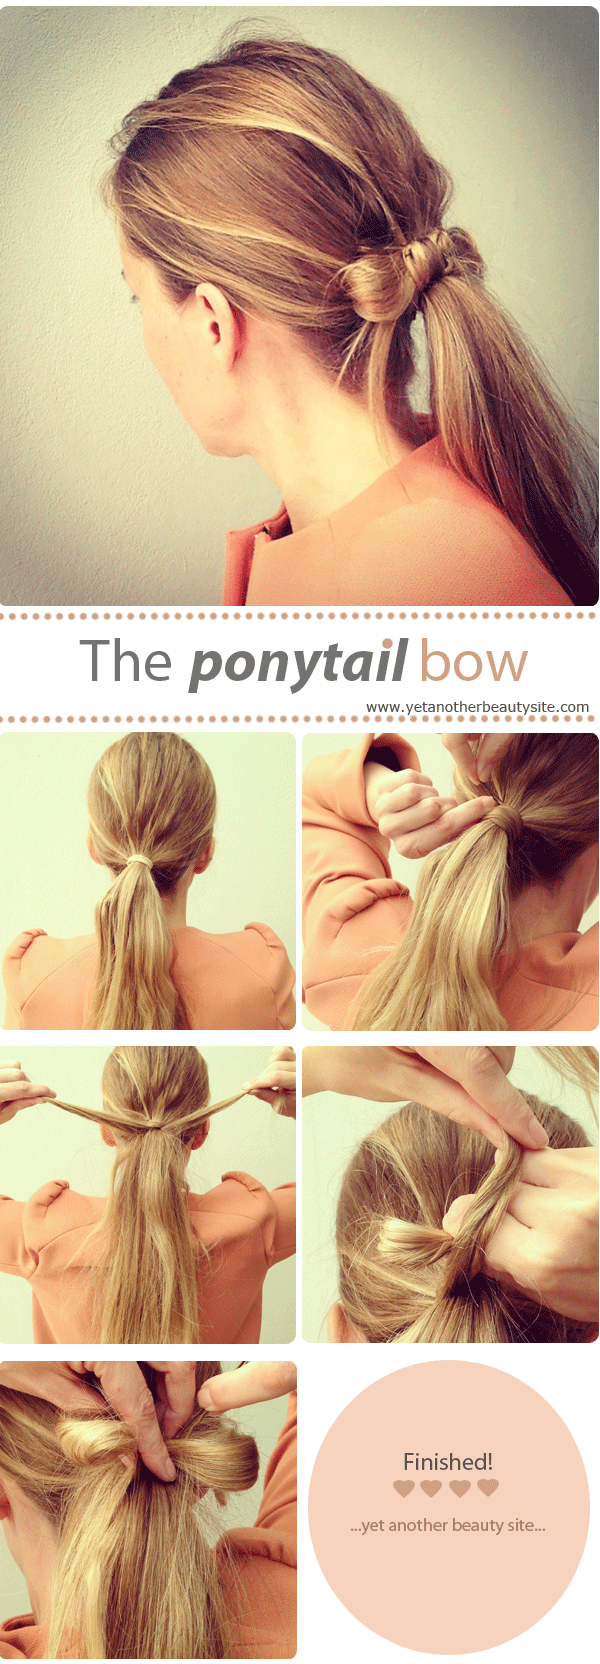 theponytailbow